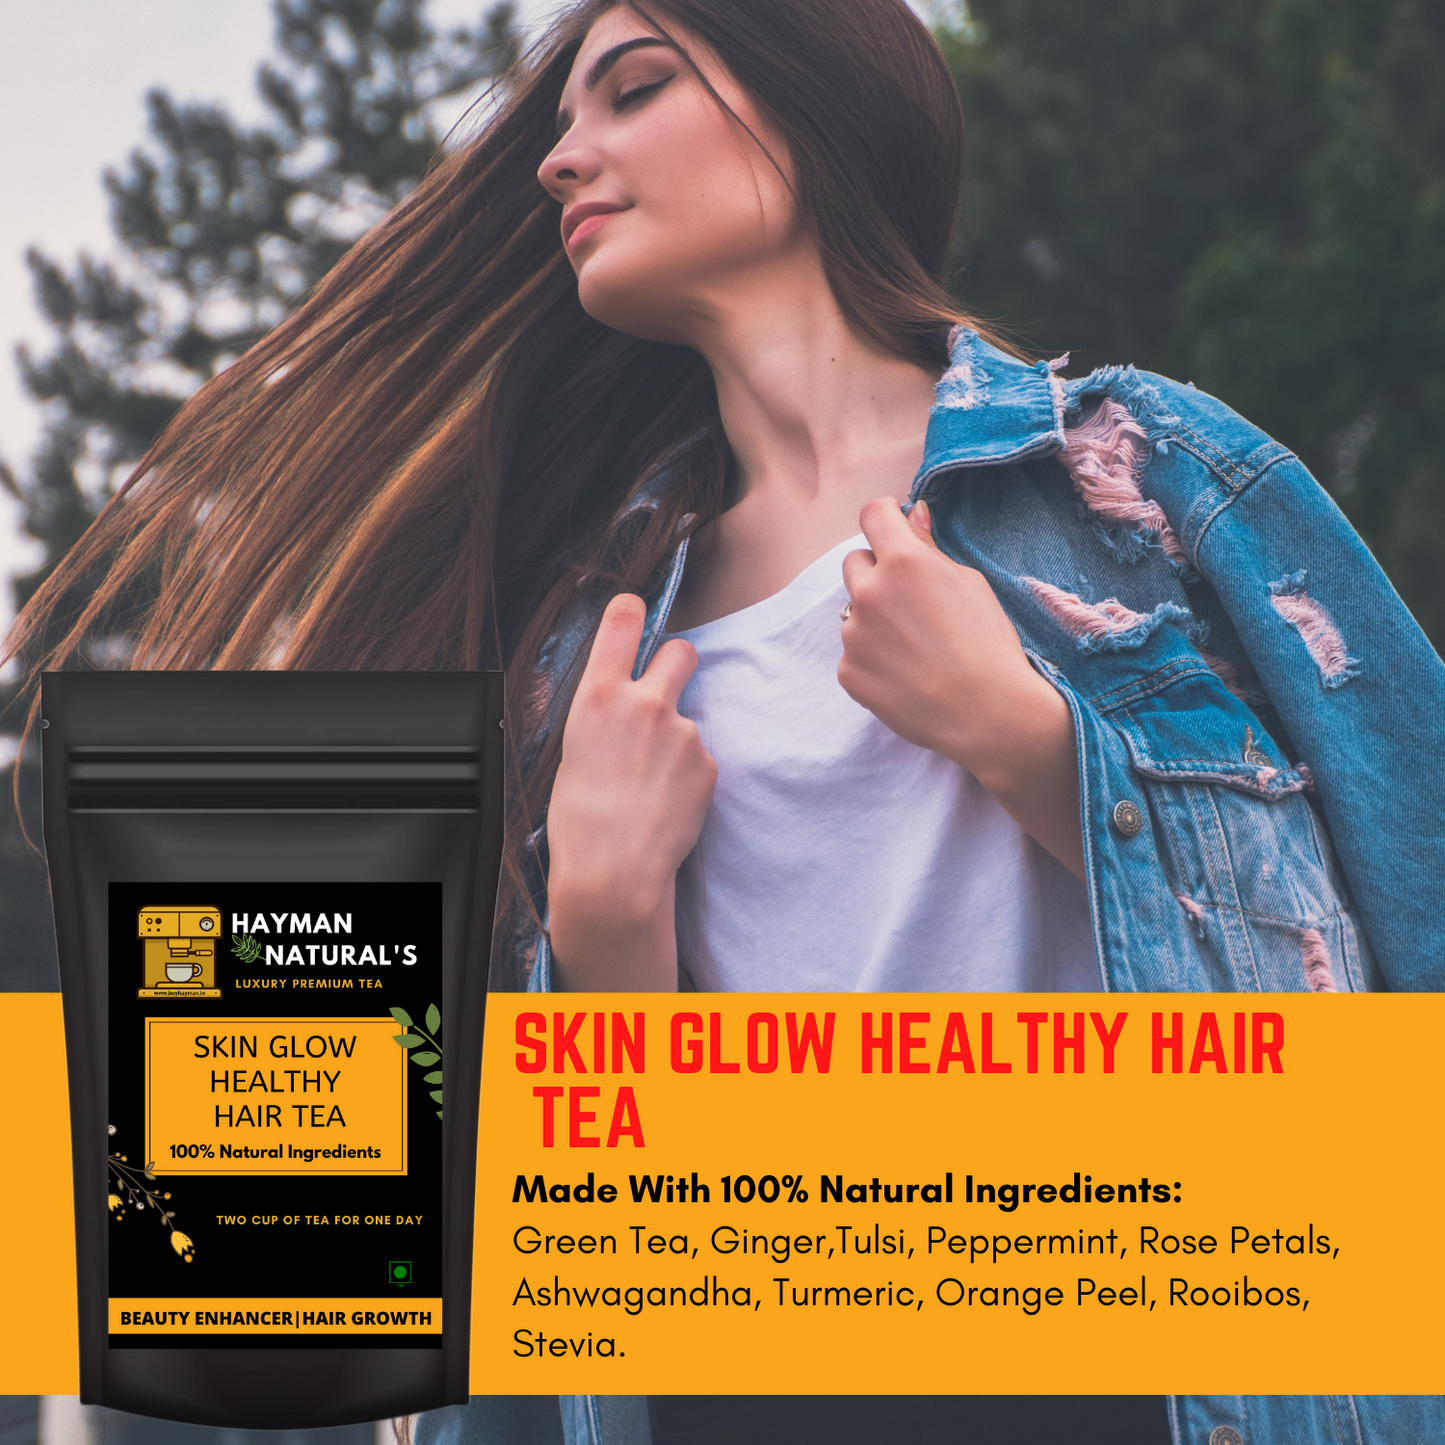 Hayman Natural's Skin Glow Healthy Hair Tea with Natural Beauty Enhancer and good for hair